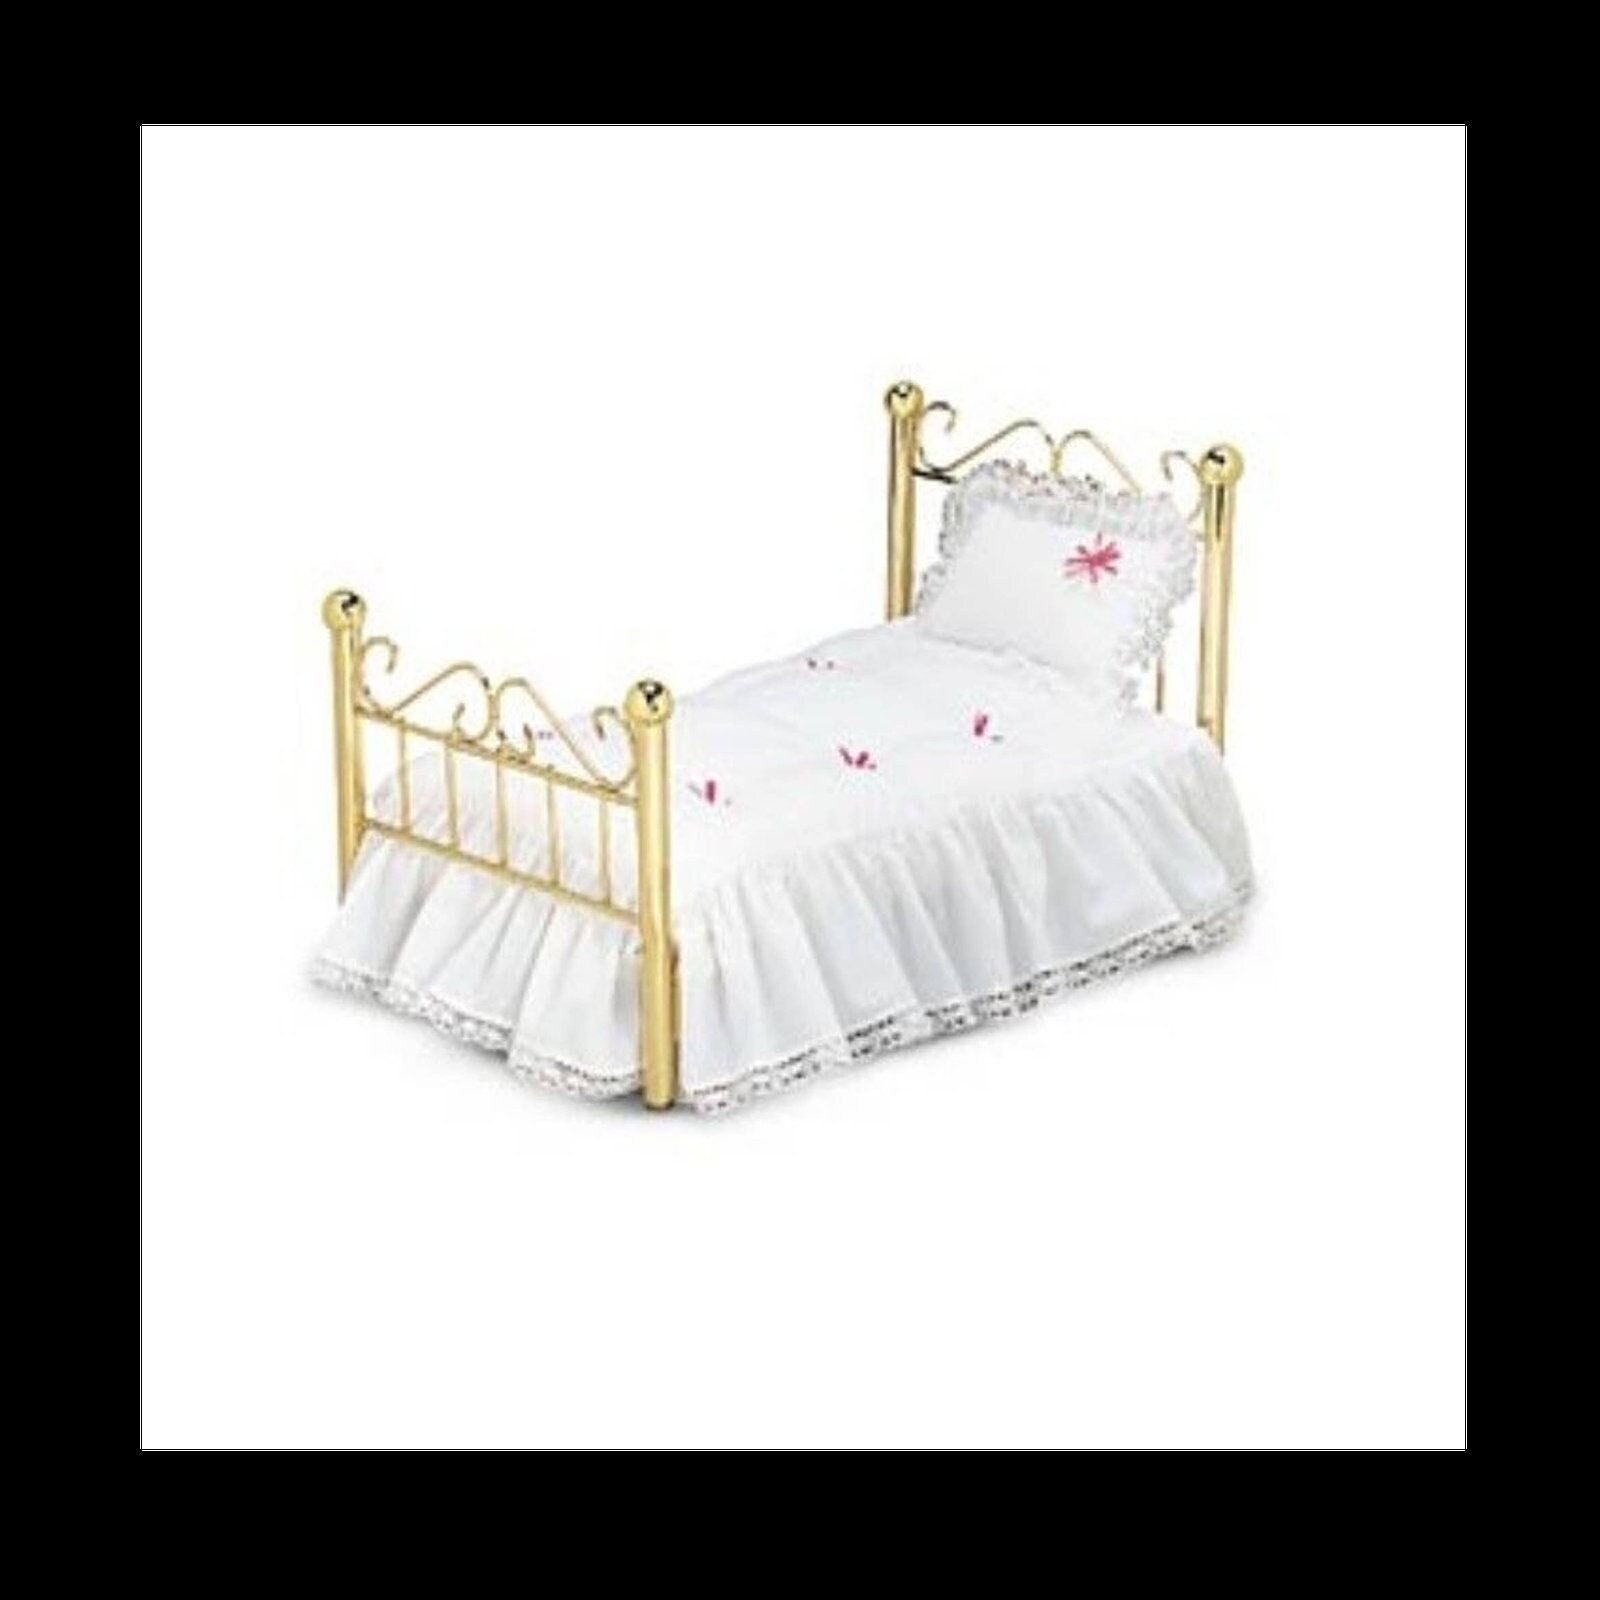 AMERICAN GIRL DOLL SAMANTHA'S BRASS BED & BEDDING for Sale in